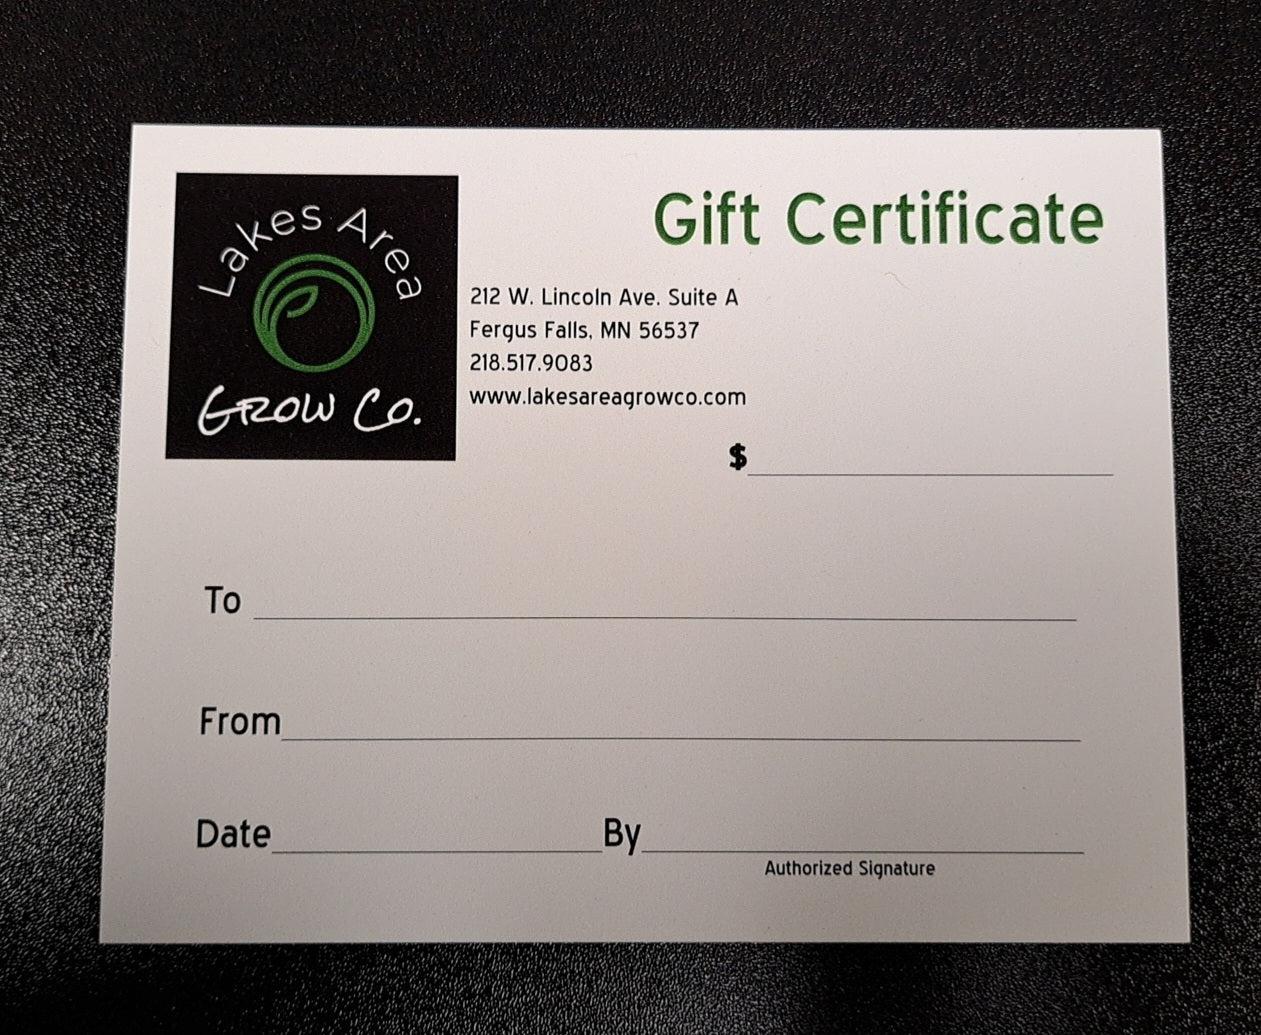 Lakes Area Grow Co. Gift Certificate